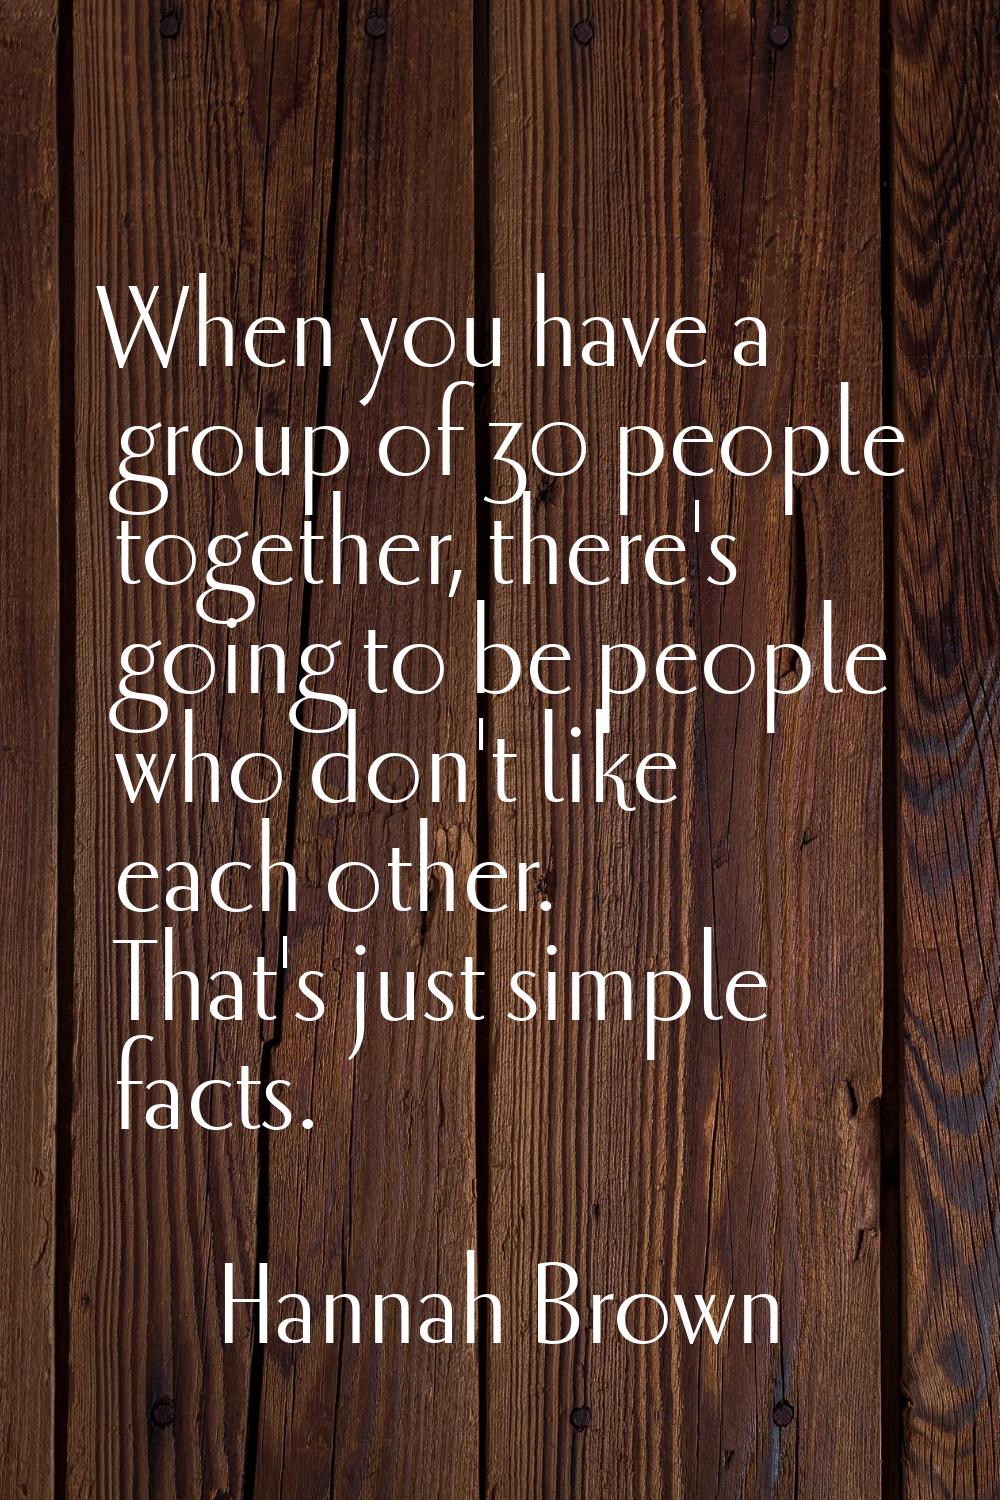 When you have a group of 30 people together, there's going to be people who don't like each other. 